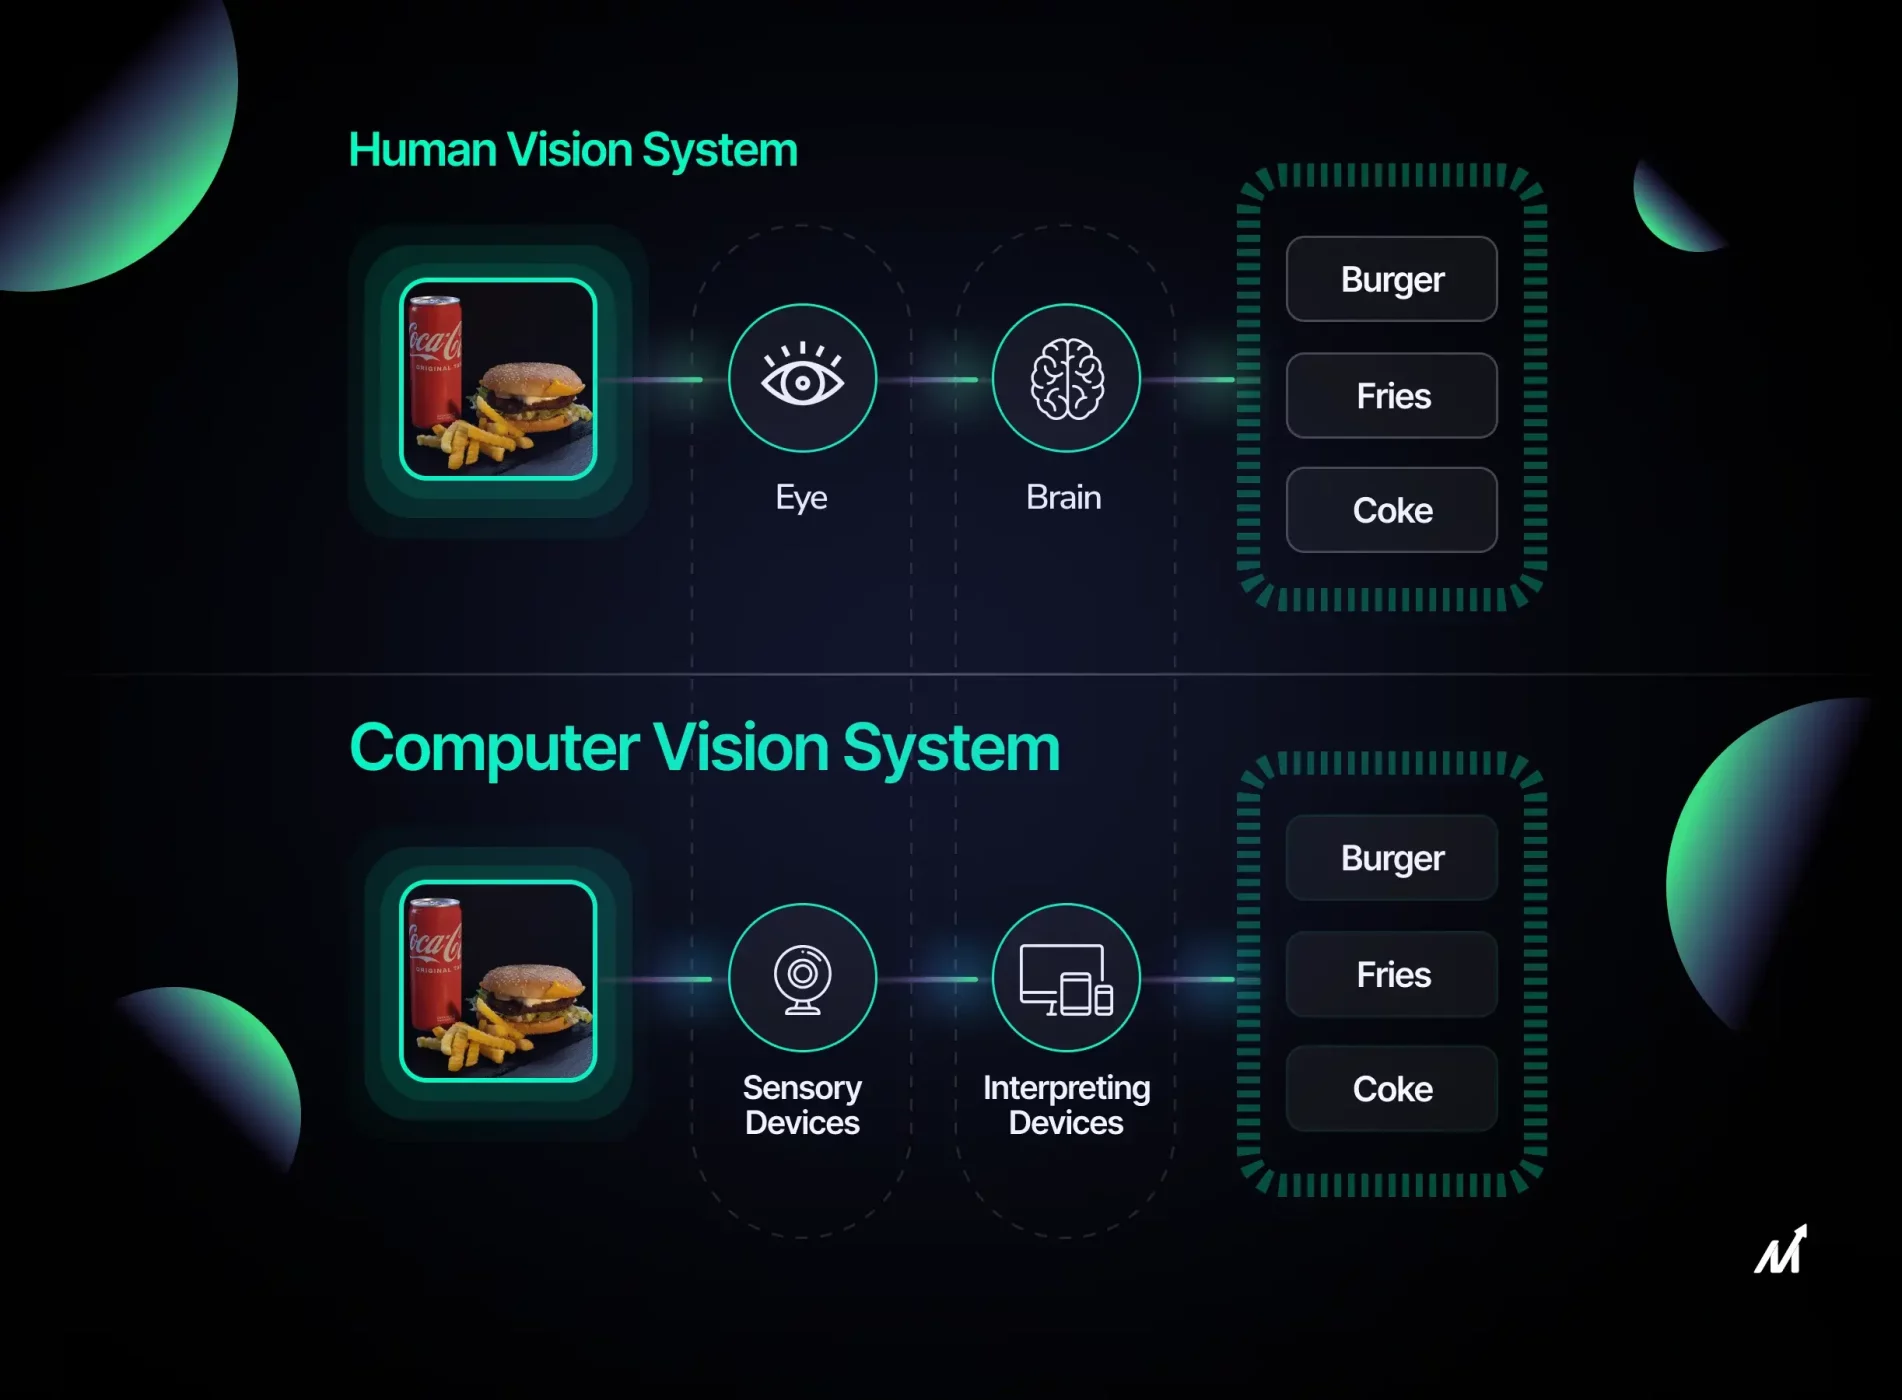 Architecting Computer Vision Applications: From Concept to Deployment